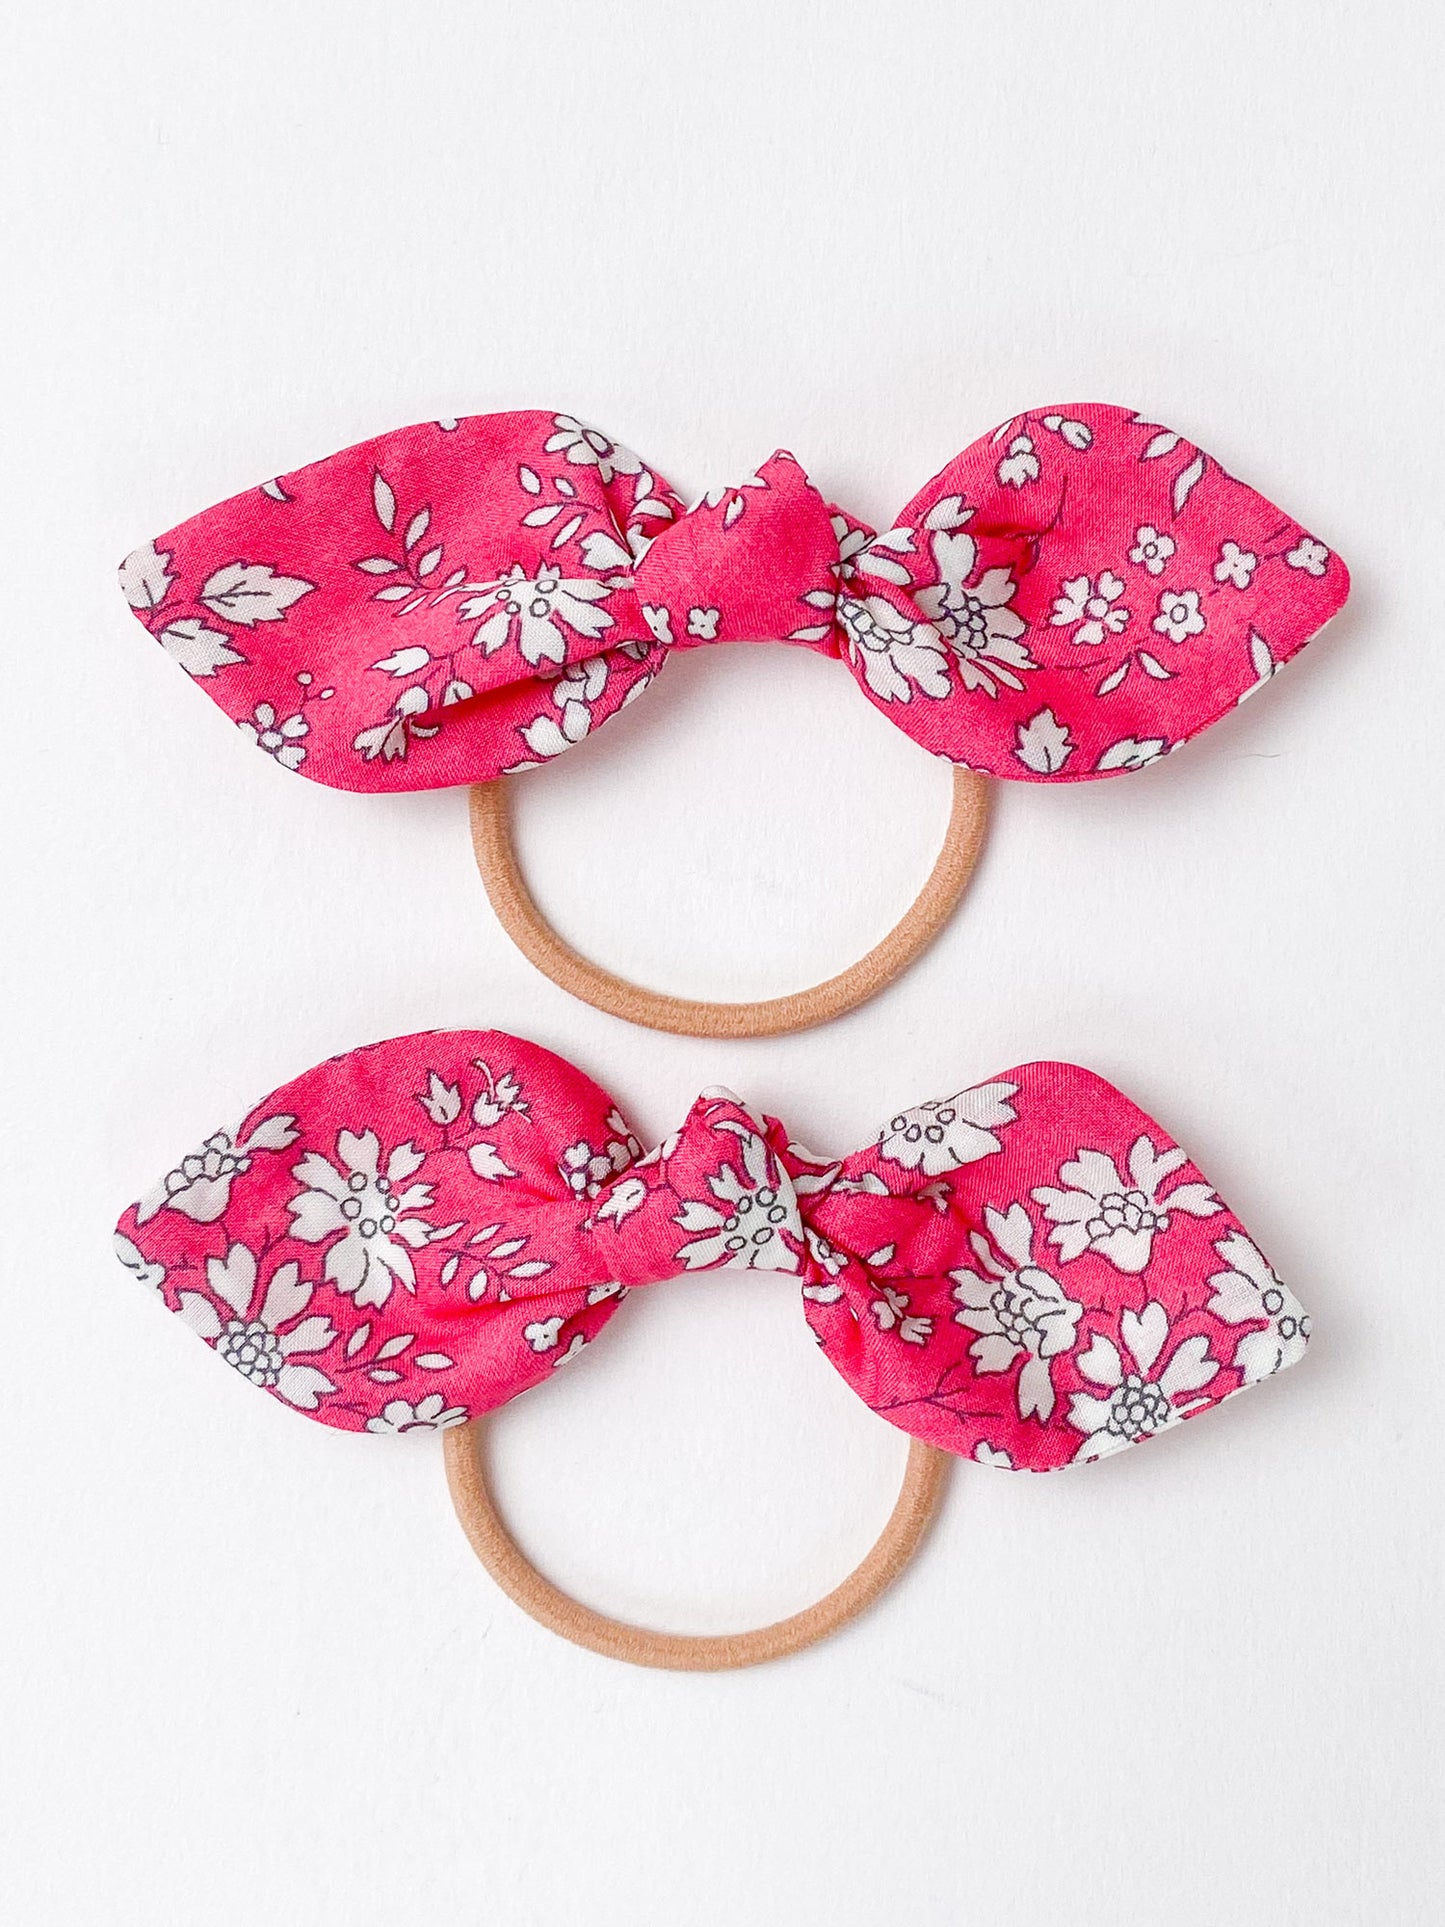 Bunny Hair Ties  Liberty Capel in Pink